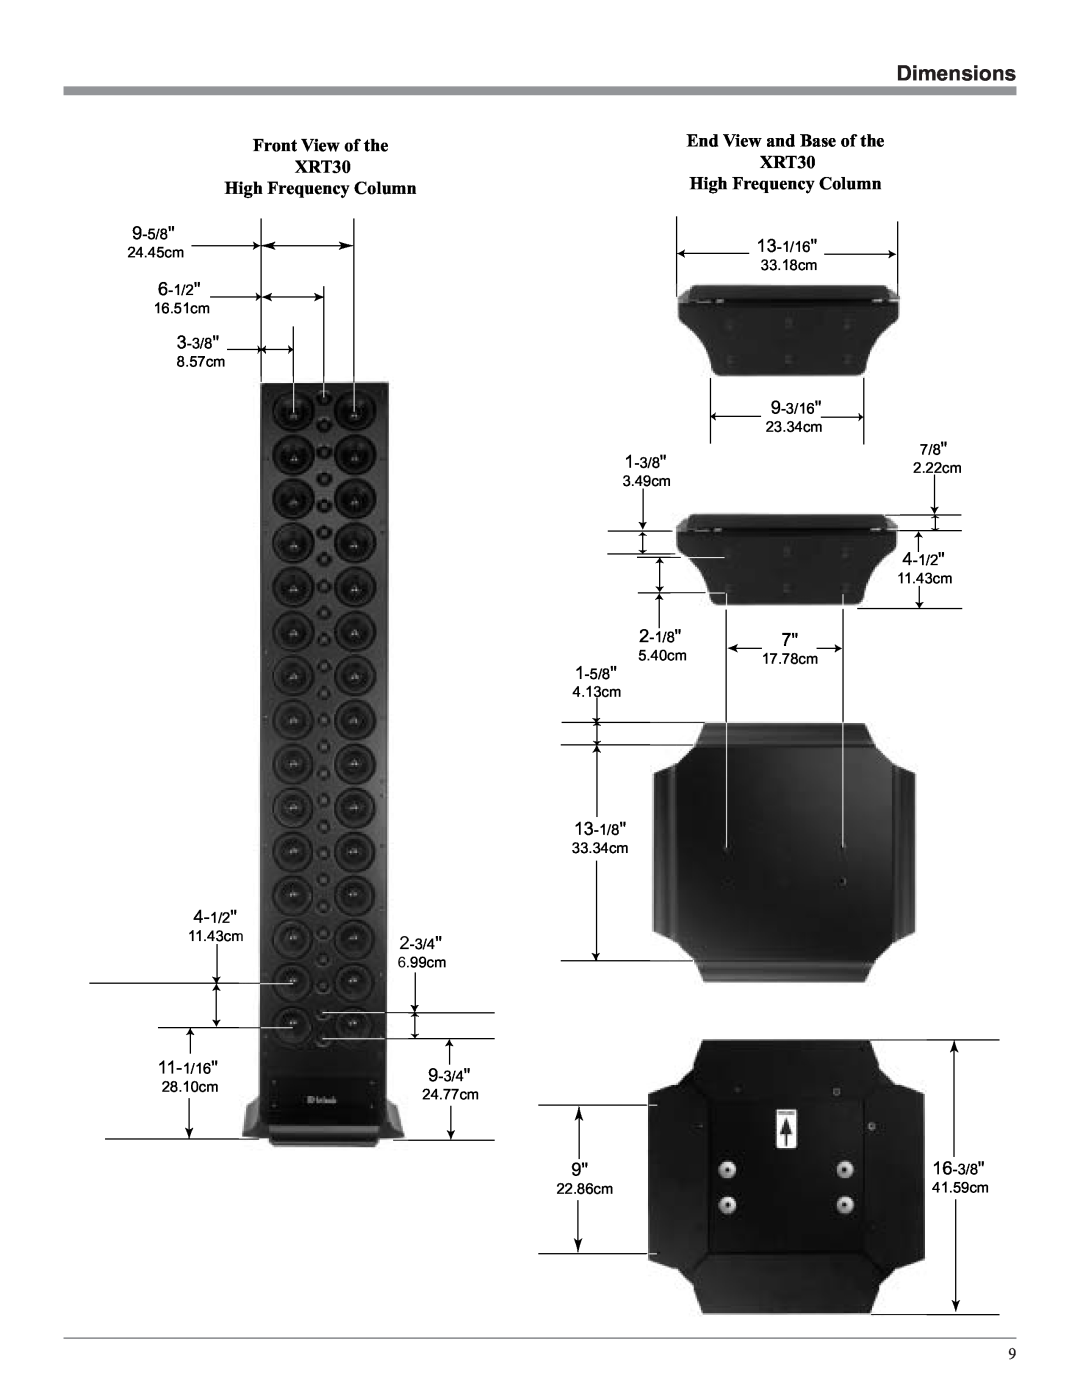 McIntosh Dimensions, Front View of the XRT30 High Frequency Column, End View and Base of the XRT30, 4-1/2, 11-1/16 